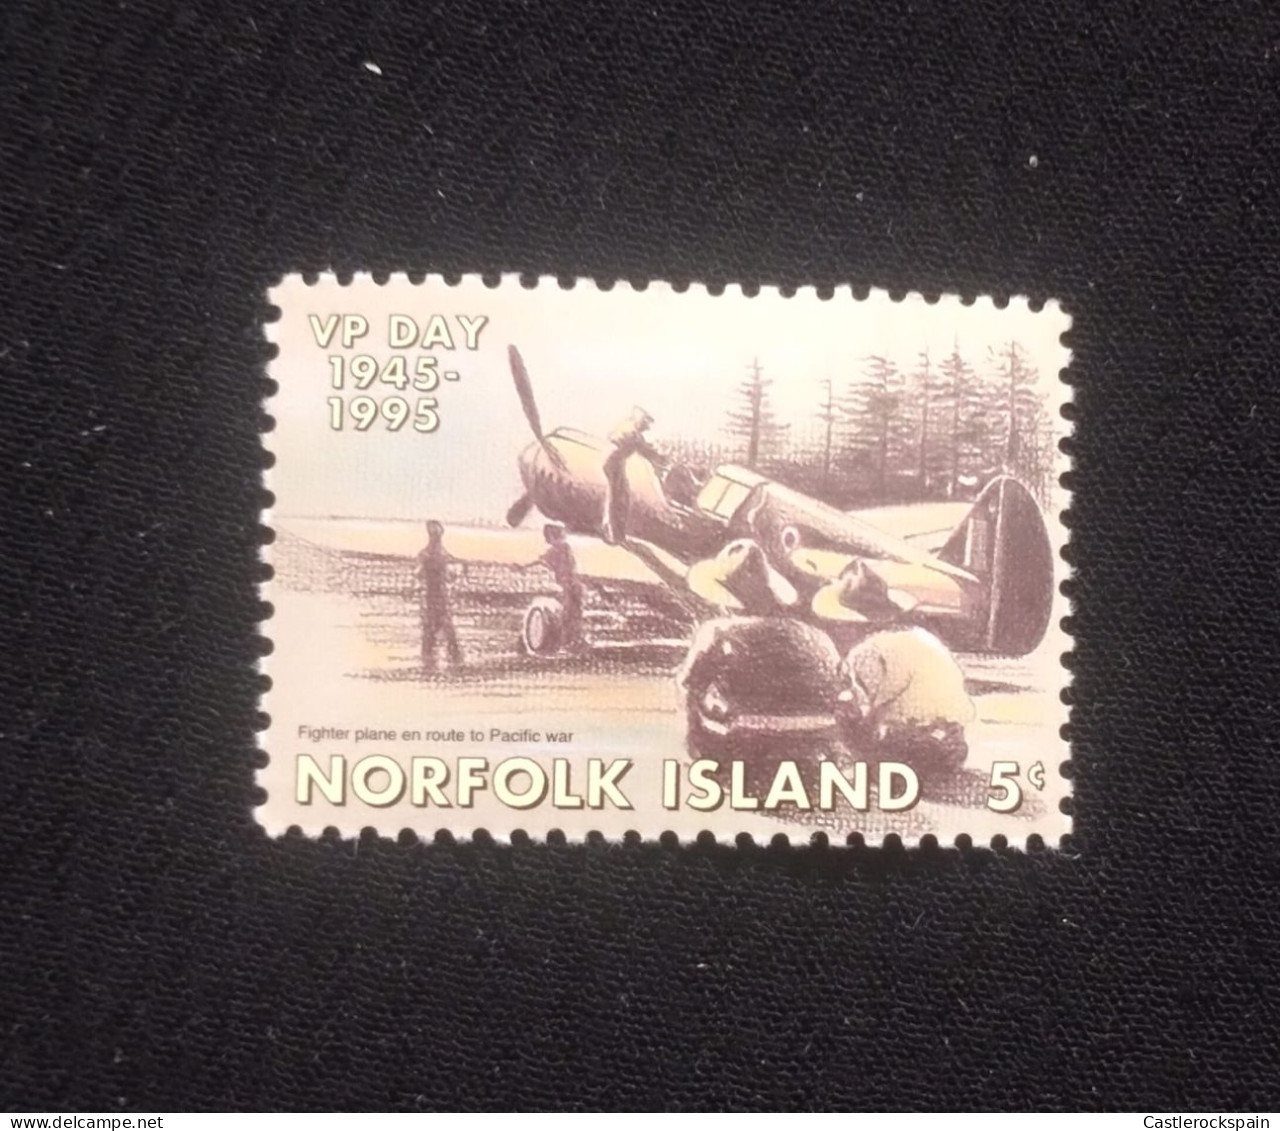 O) 1995 NORFOLK ISLAND, VP DAY,  FIGHTER PLANE EN ROUTE TO PACIFIC WAR, MNH - Ile Norfolk